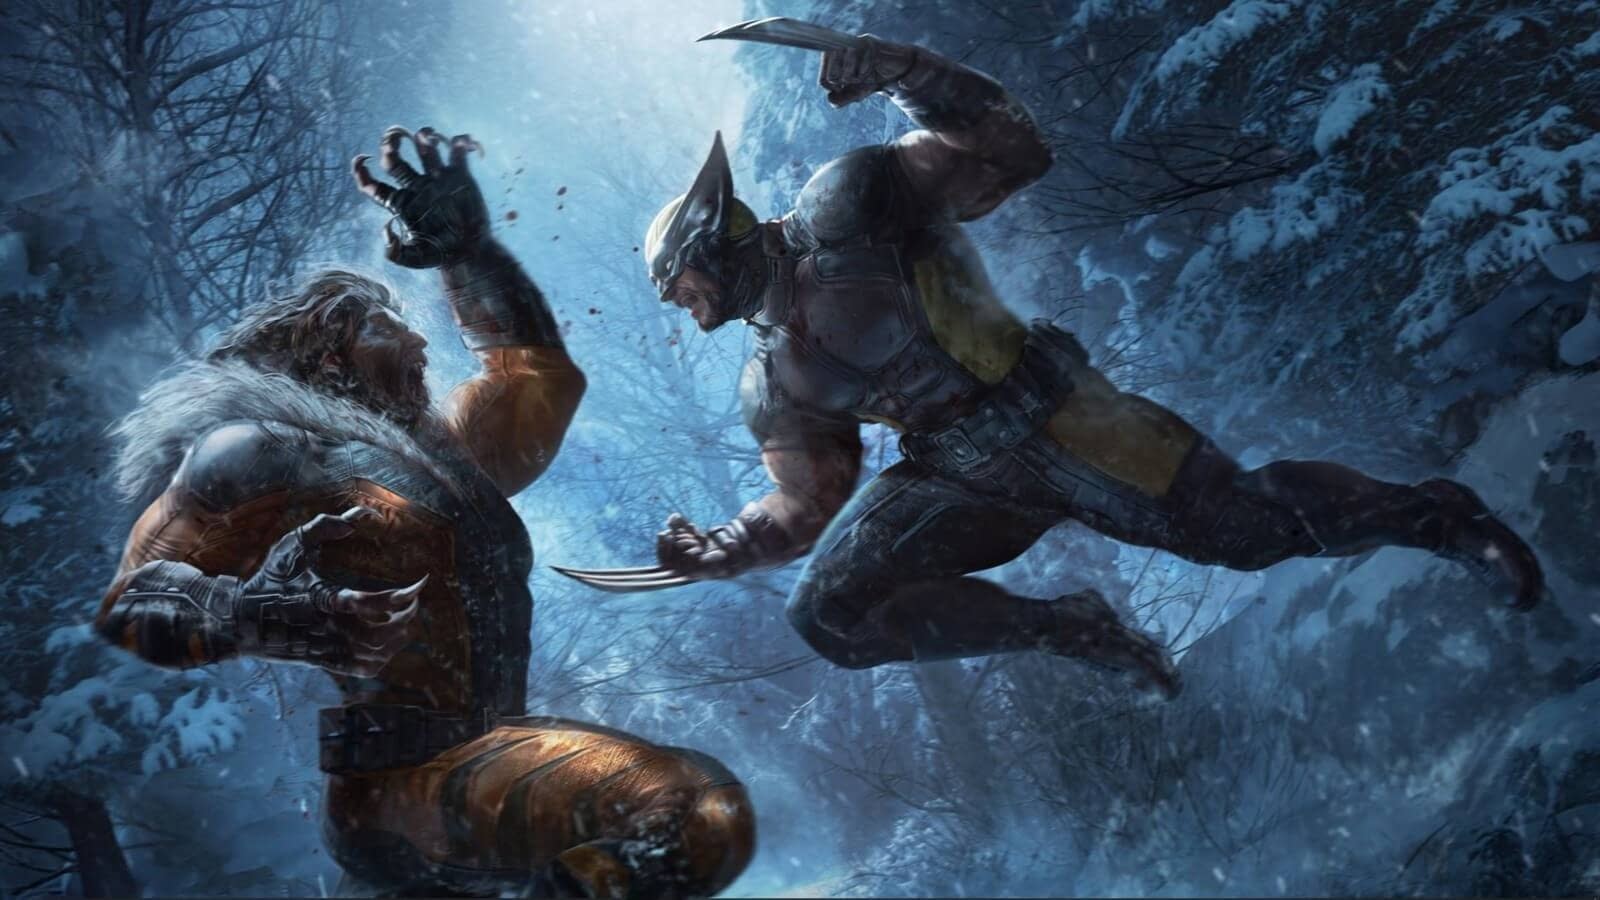 Two New Fragman Leaked From Marvel’s Wolverine!